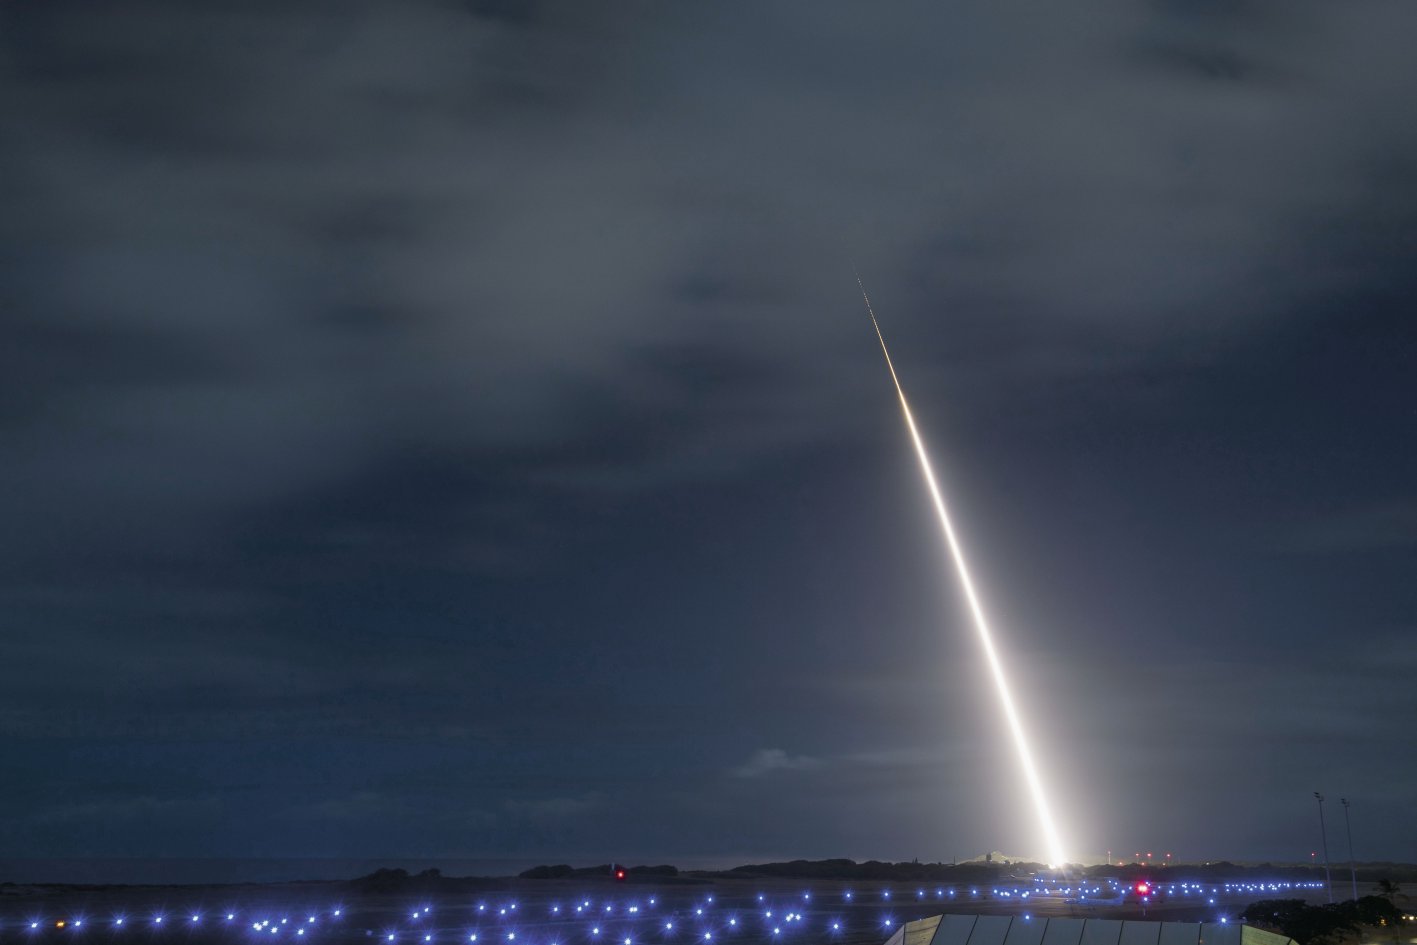 A target resembling an advanced ballistic missile is seen here being launched from the Pacific Missile Range Facility in Hawaii on 26 October 2018 as part of an intercept flight test involving an SM-3 Block IIA interceptor missile. Japan signed a JPY30 billion (USD286.4 million) contract in December 2020 to receive an unspecified number of SM-3 Block IIA missiles from the United States.  (US Missile Defense Agency)